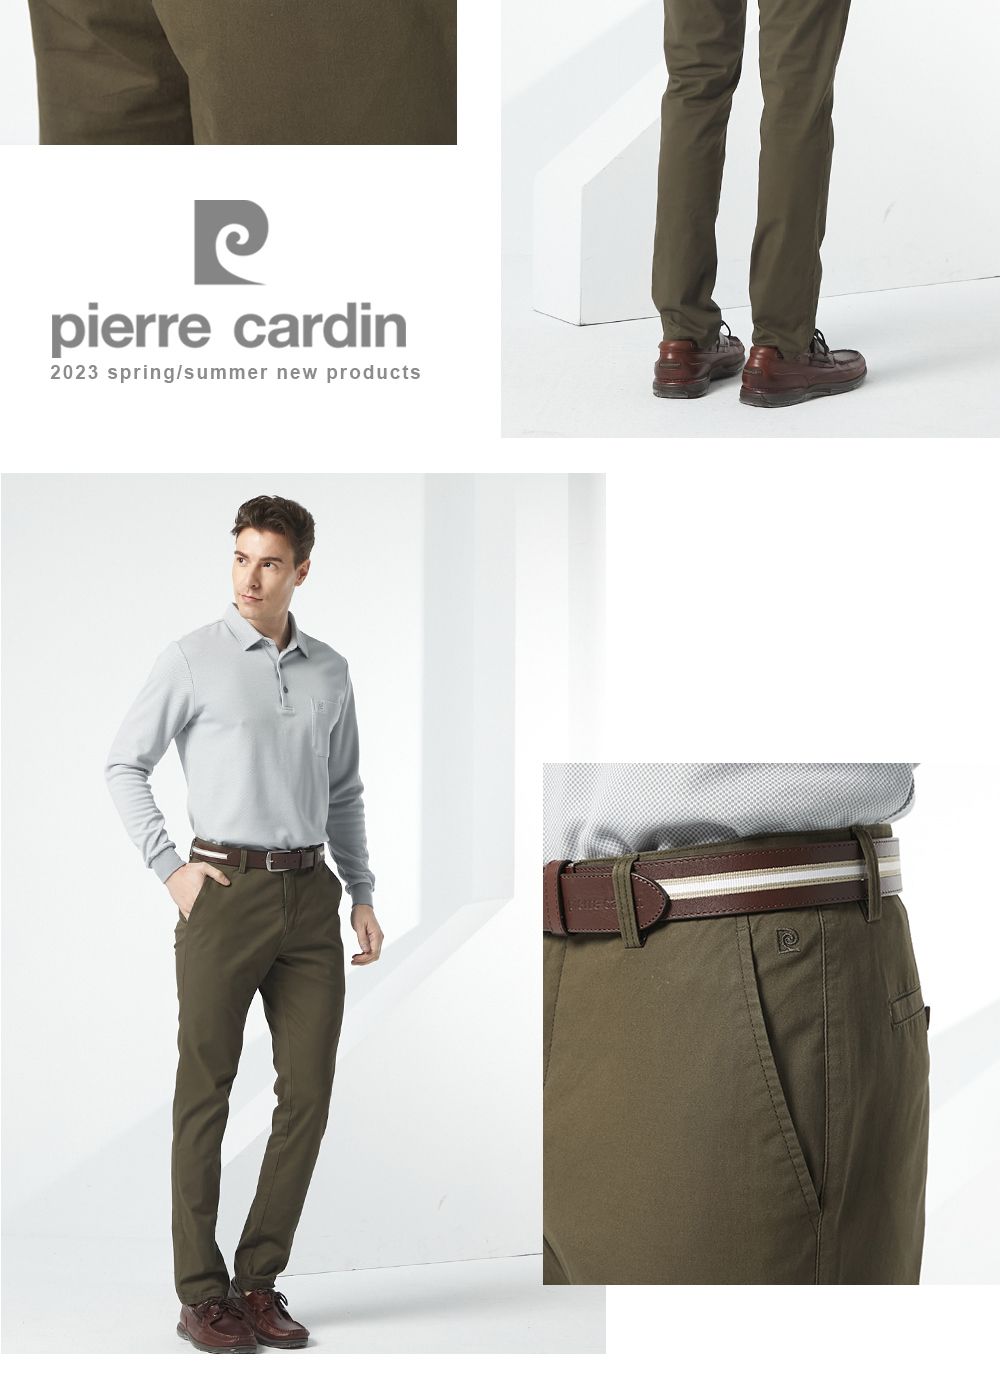 pierre cardin2023 spring/summer new products